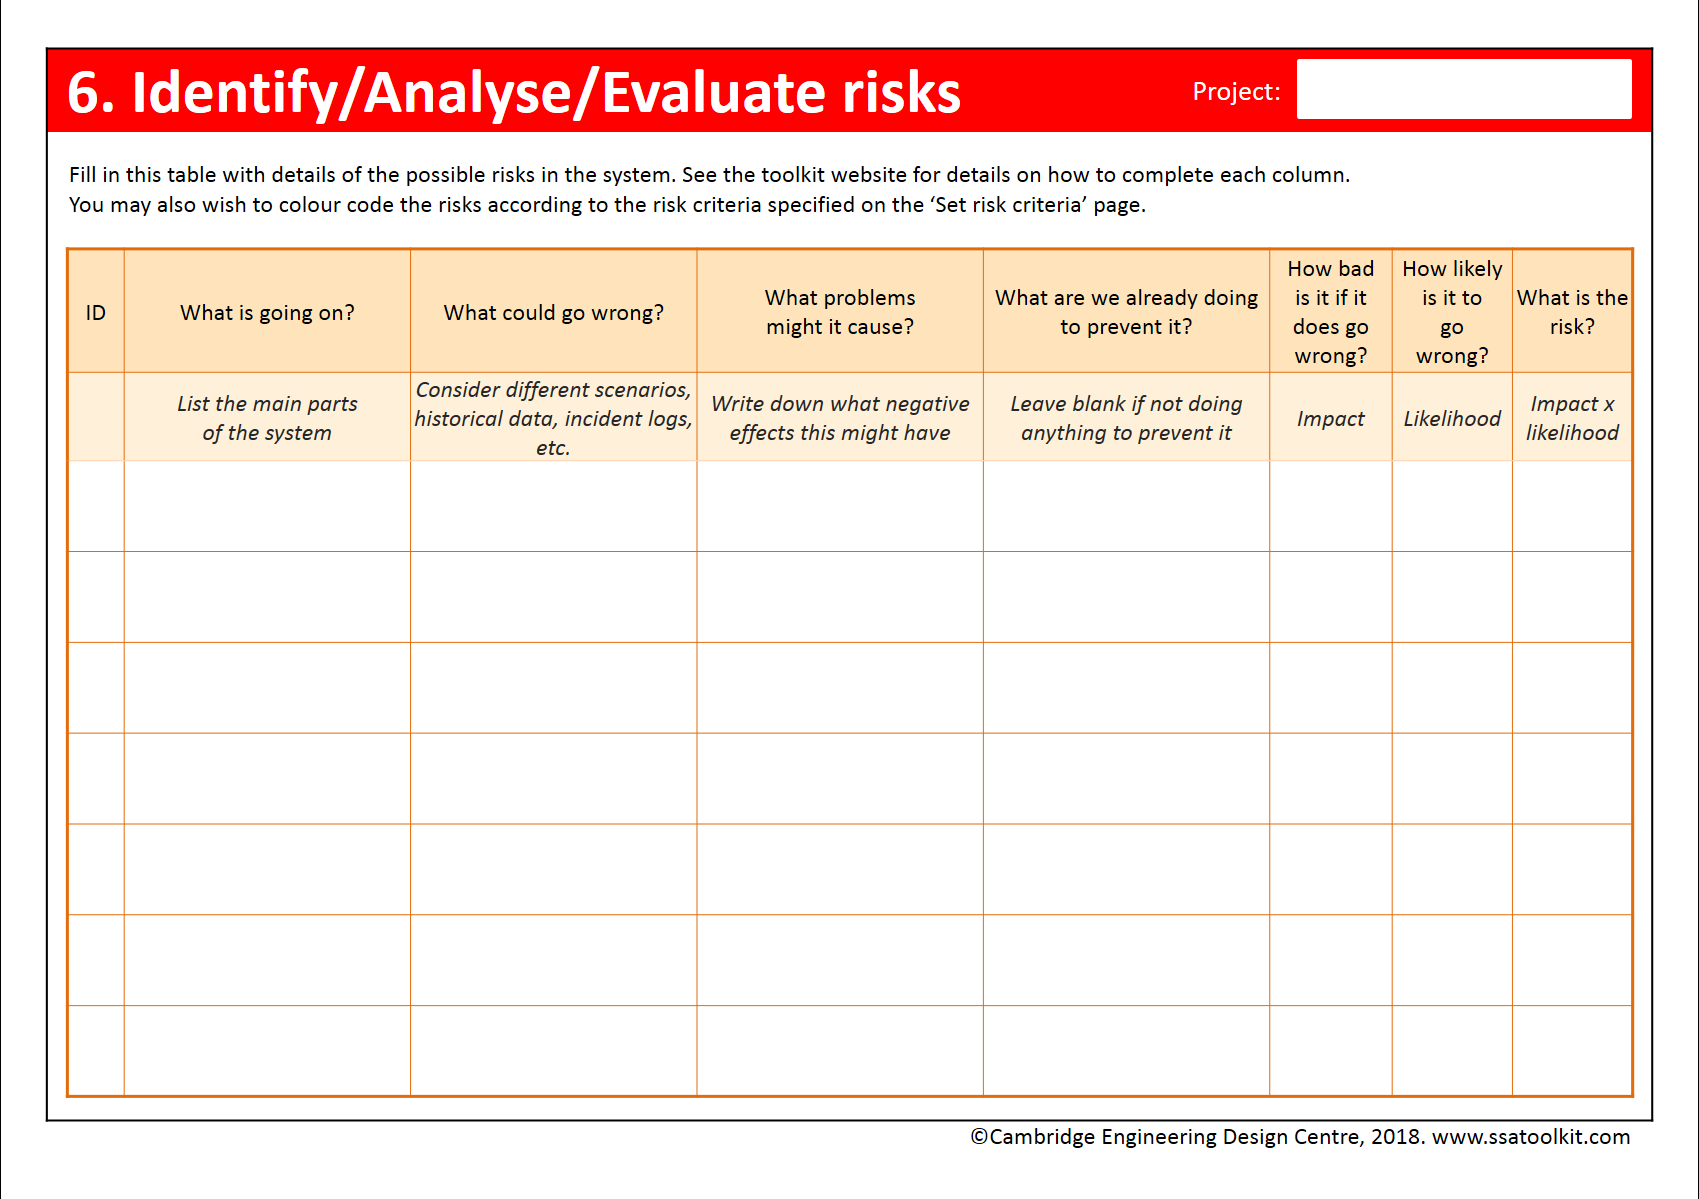 Screenshot of the Identify/Assess/Evaluate risks page of the assessment form